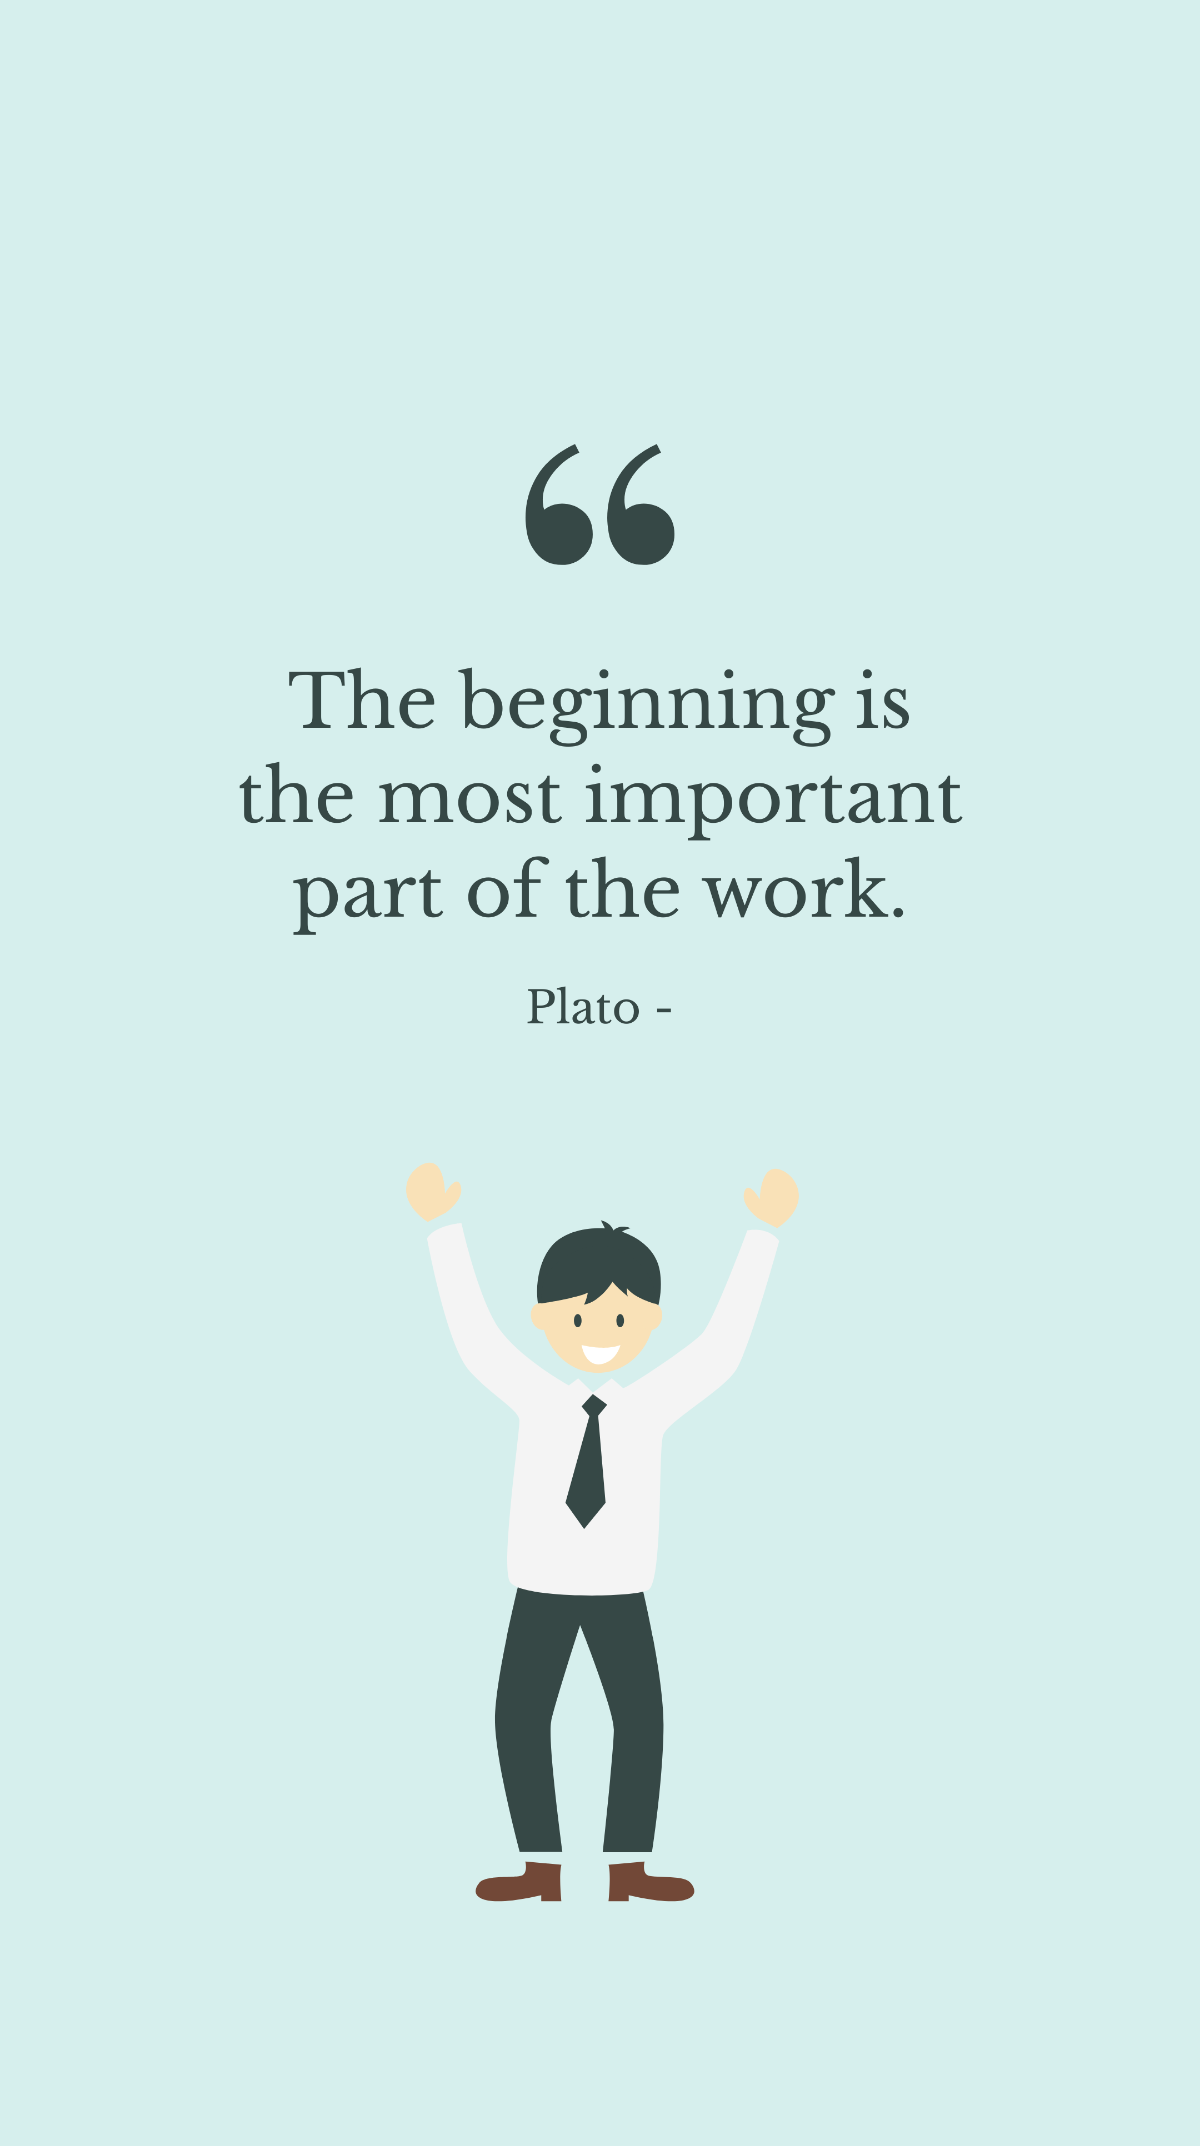 Plato - The beginning is the most important part of the work.